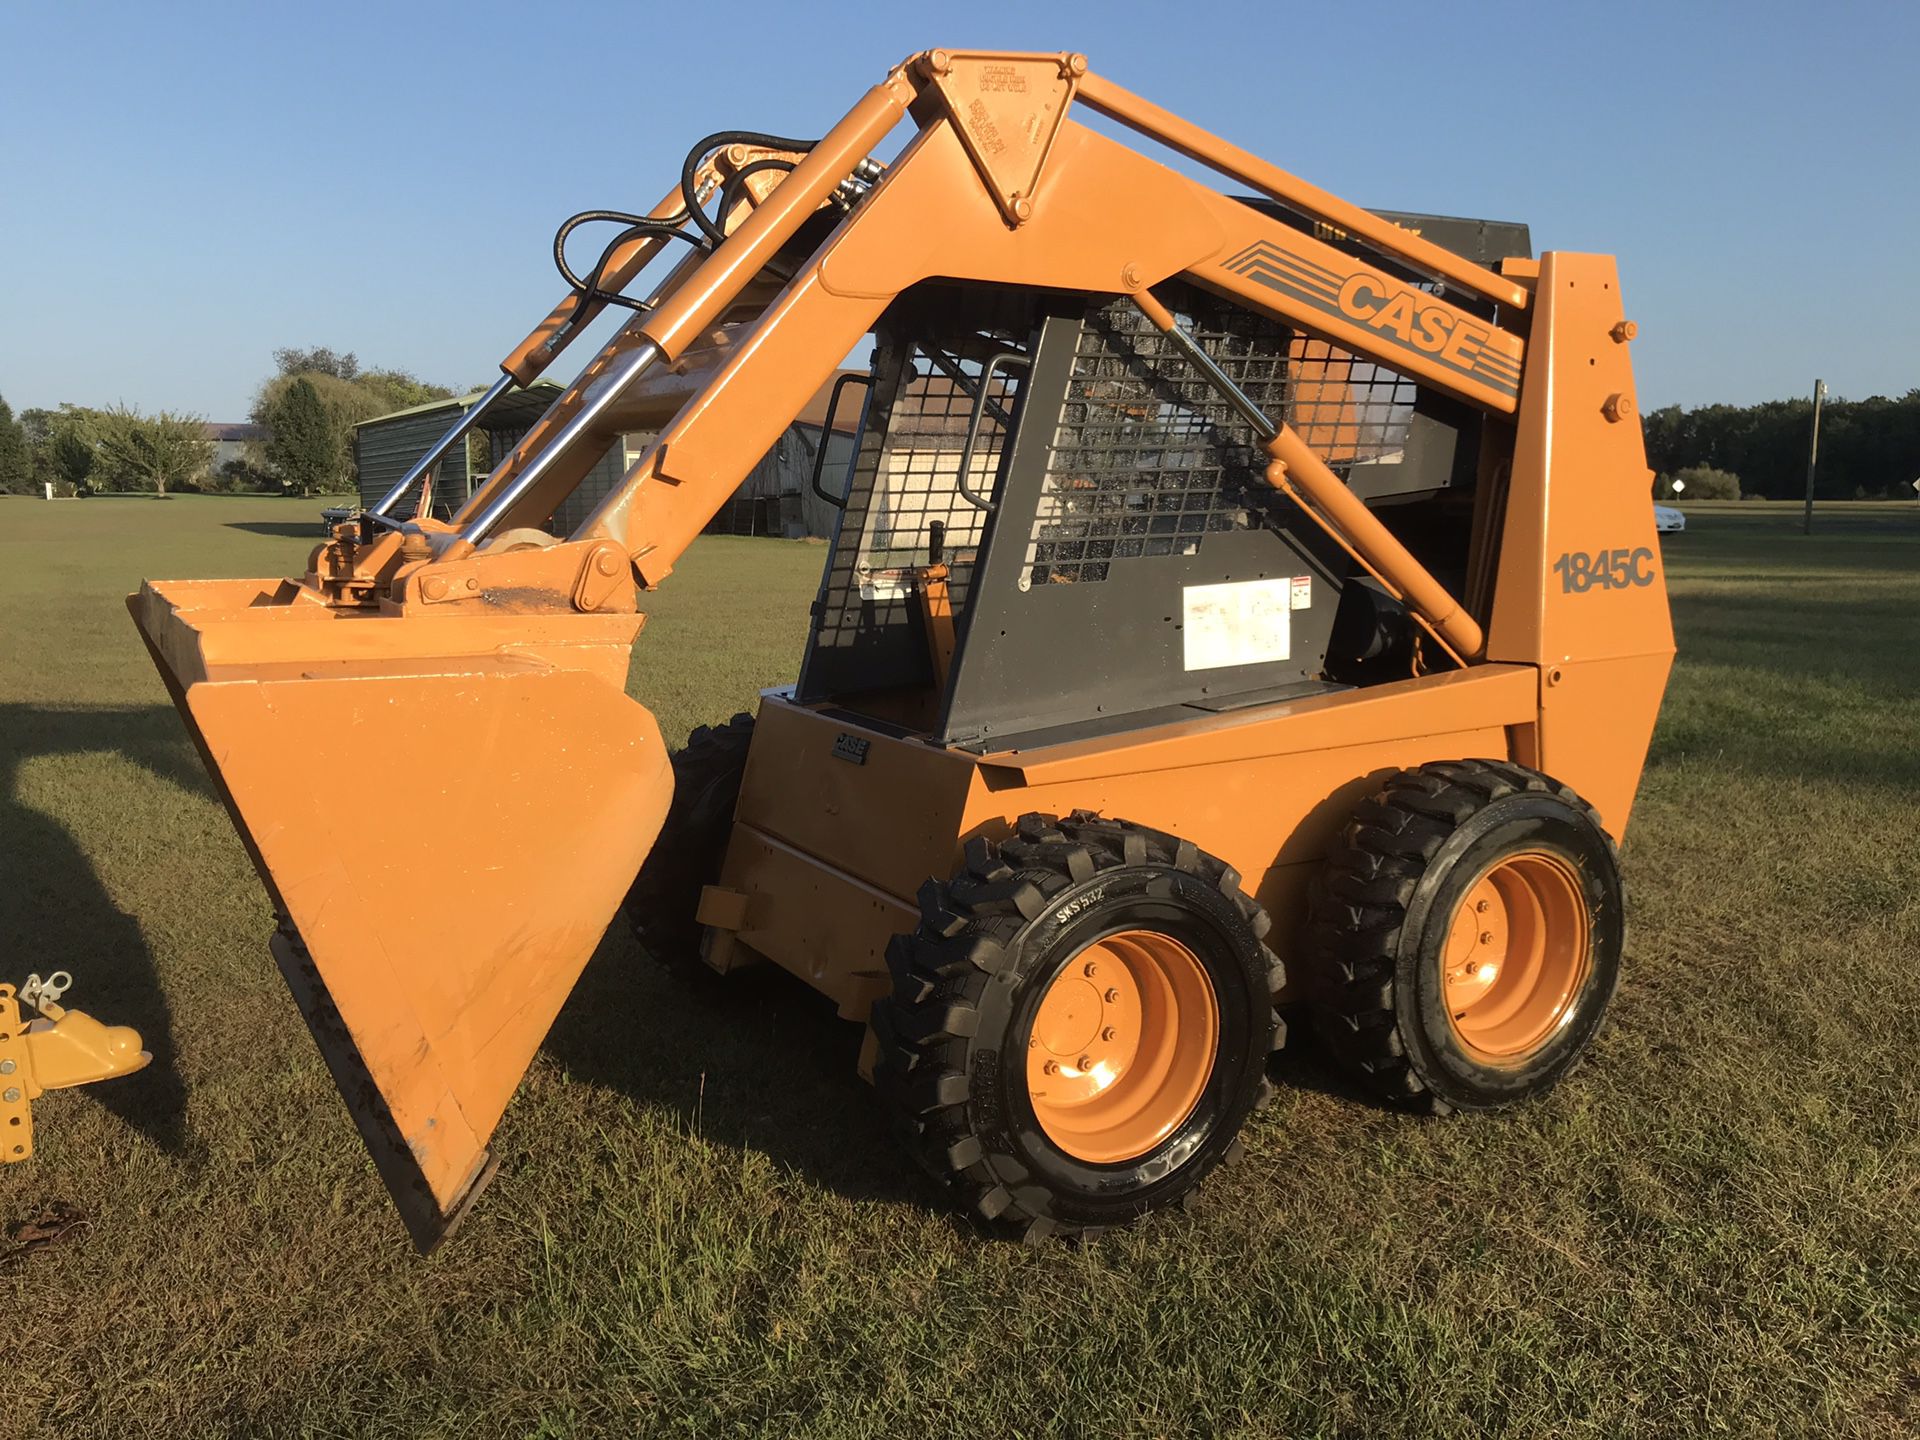 Case Skid Steer, Model 1845C w/ trailer and attachments